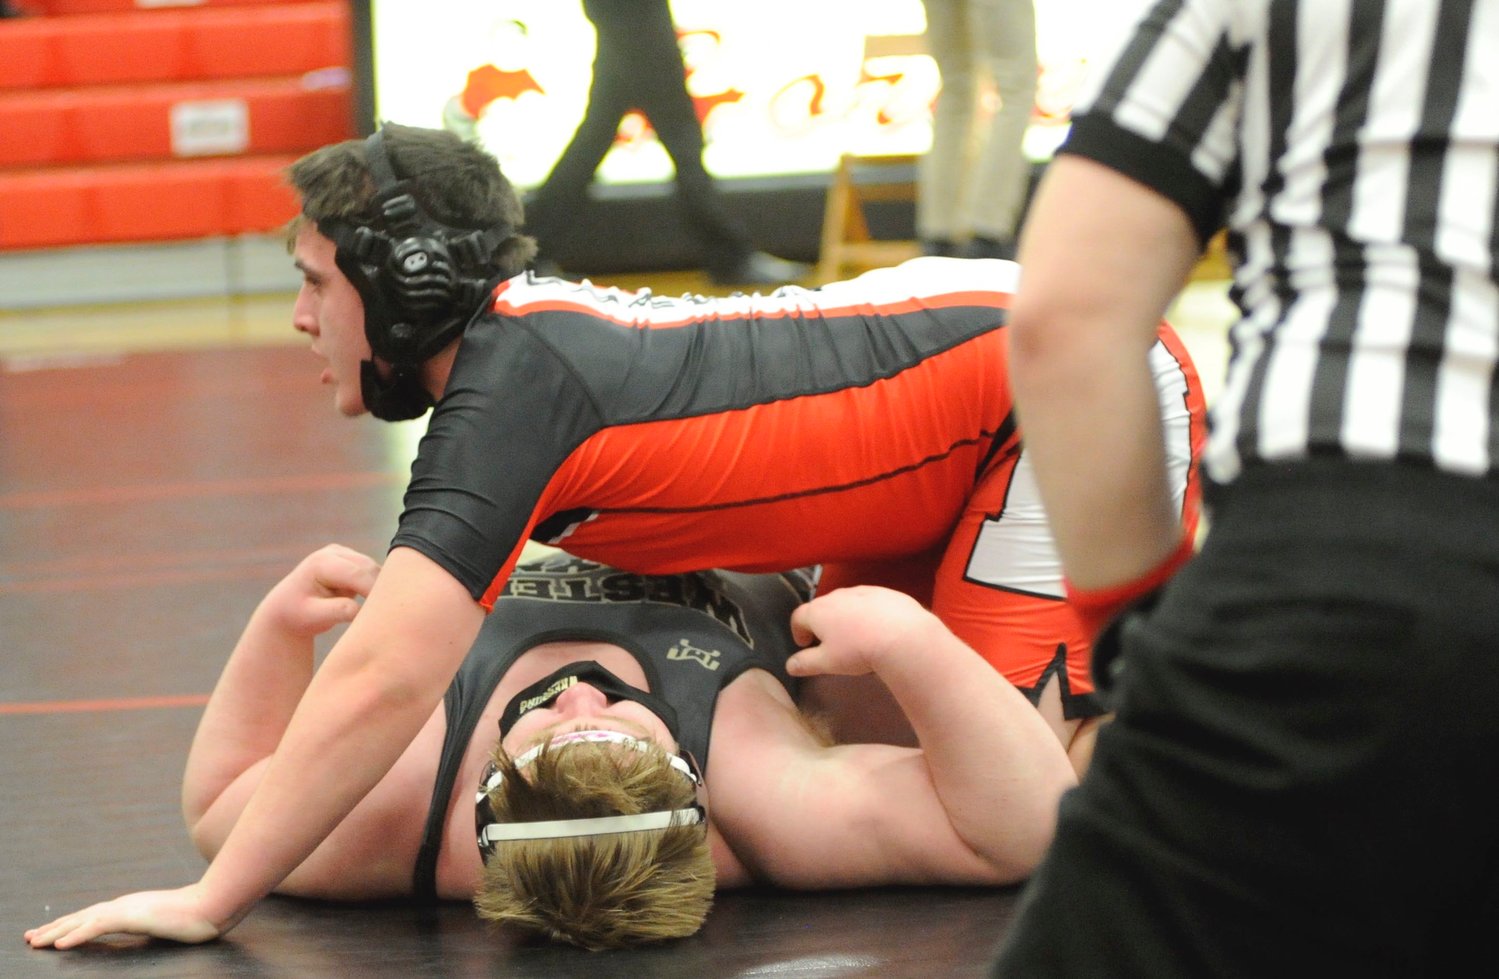 In bout #5, Honesdale’s Arron Phillips defeated his opponent in the 285-pound weight class.